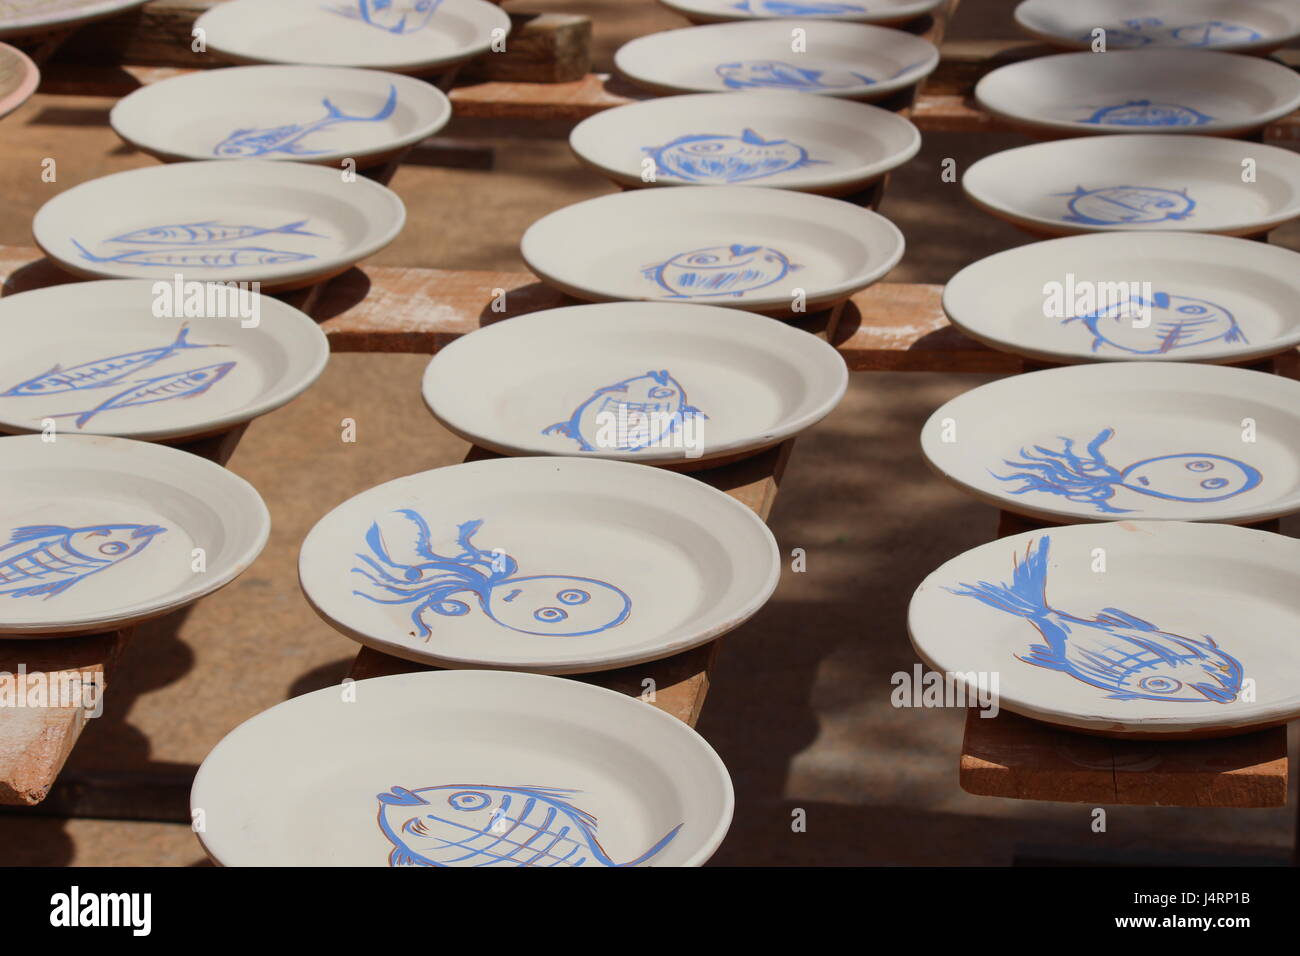 Spanish pottery plates with blue fish designs on white background drying on racks in sun Stock Photo